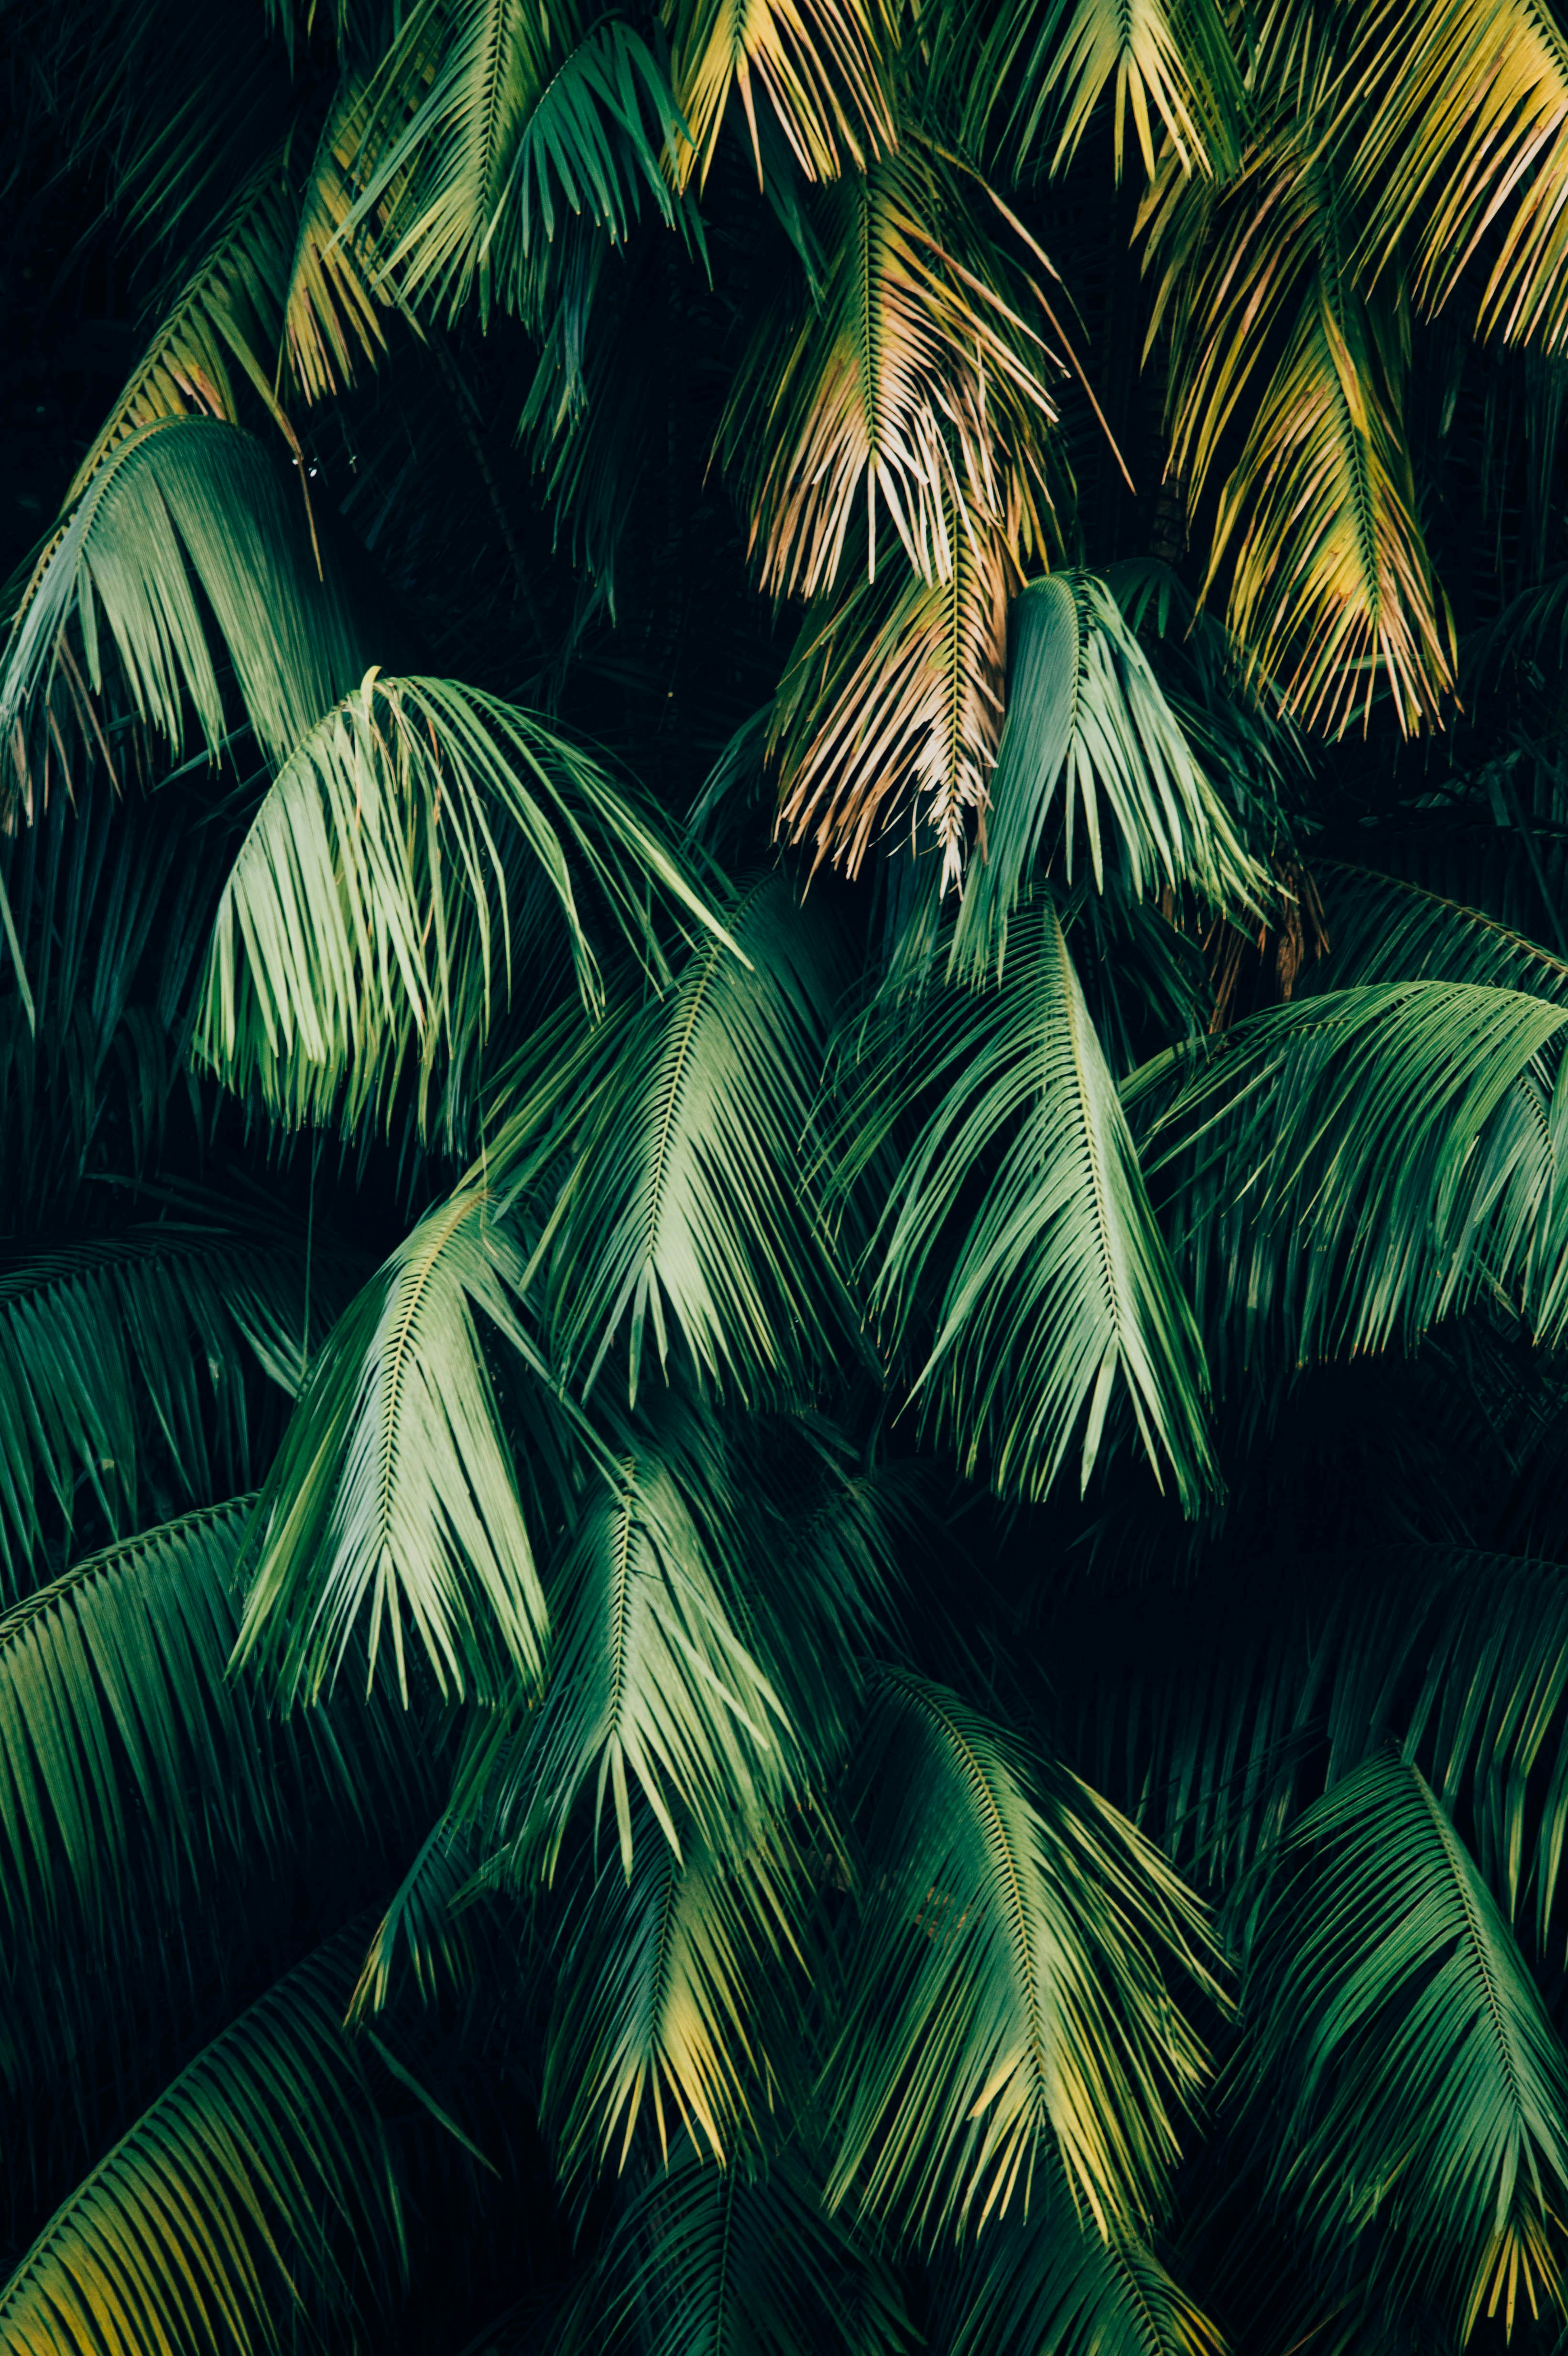 Nature produces the most astoundingly beautiful images: the swirling lava of a volcano, palm trees against a blue sky, snow-capped mountains towering above. Unsplash has magnificent , high-quality photos of all the delights that nature has to offer.